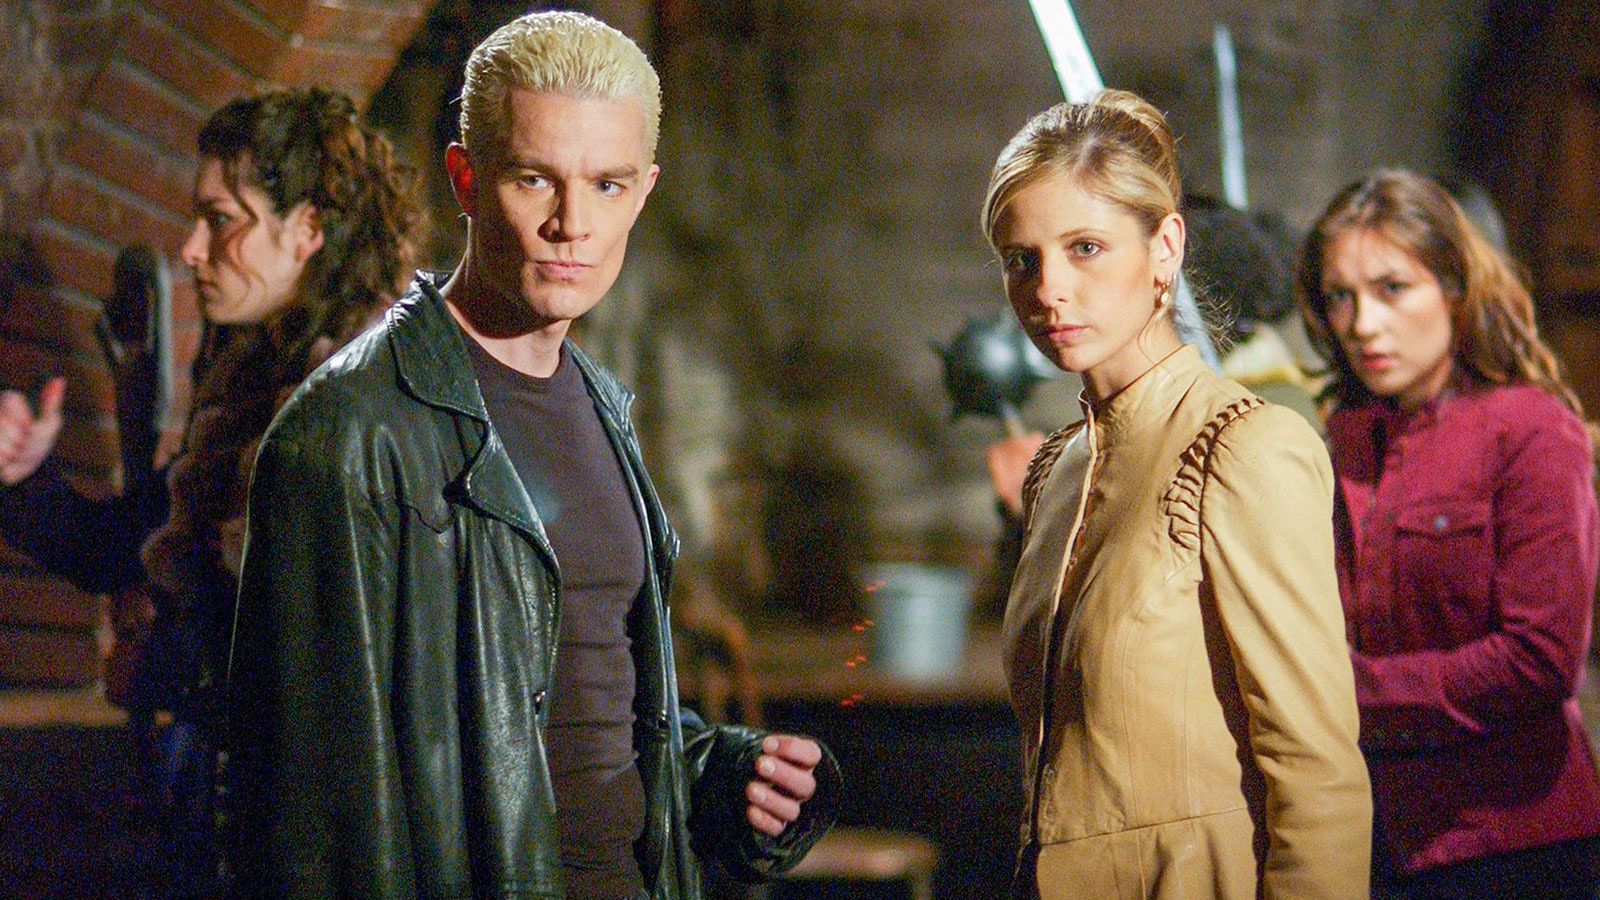 Buffy the Vampire Slayer Audible Sequel Led by Spike Set to Be